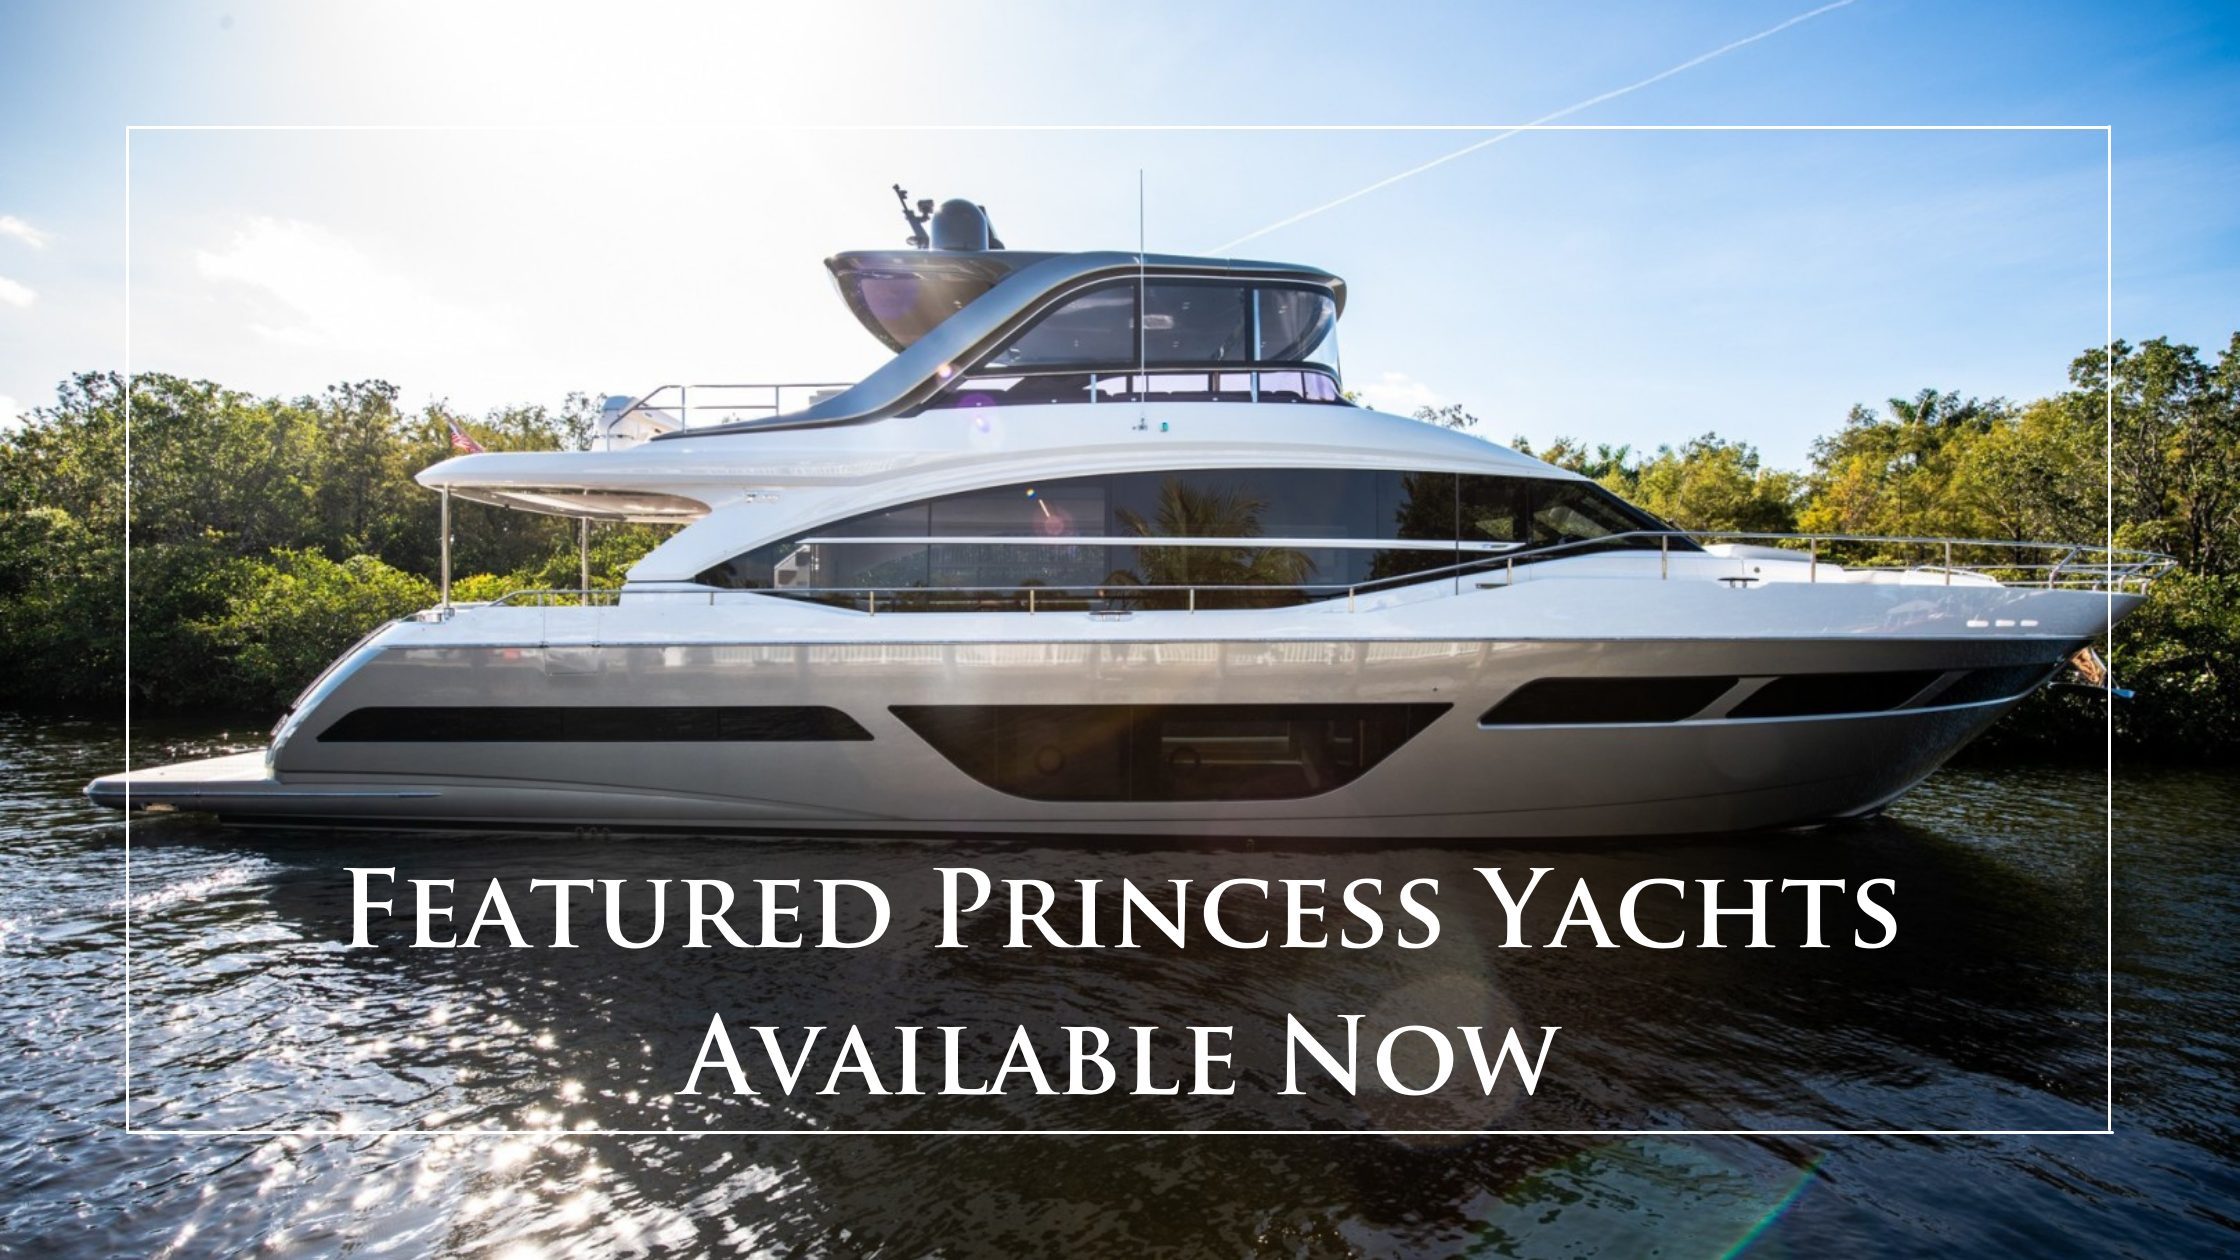 RULING THE HIGH SEAS: FEATURED PRINCESS YACHTS LISTINGS AT HMY